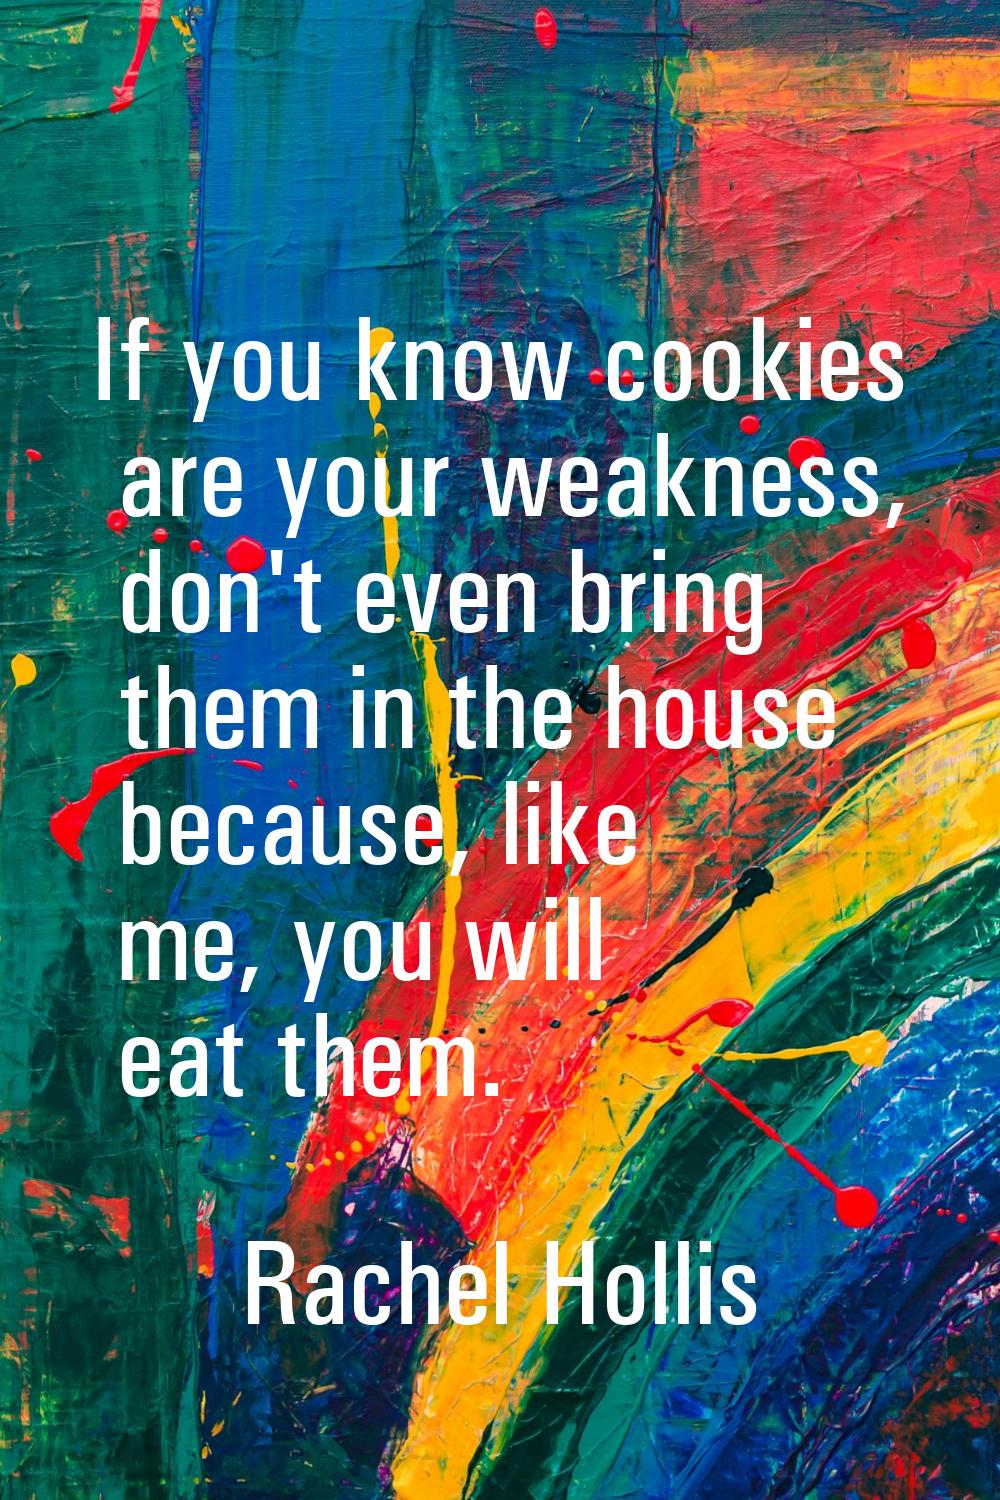 If you know cookies are your weakness, don't even bring them in the house because, like me, you wil